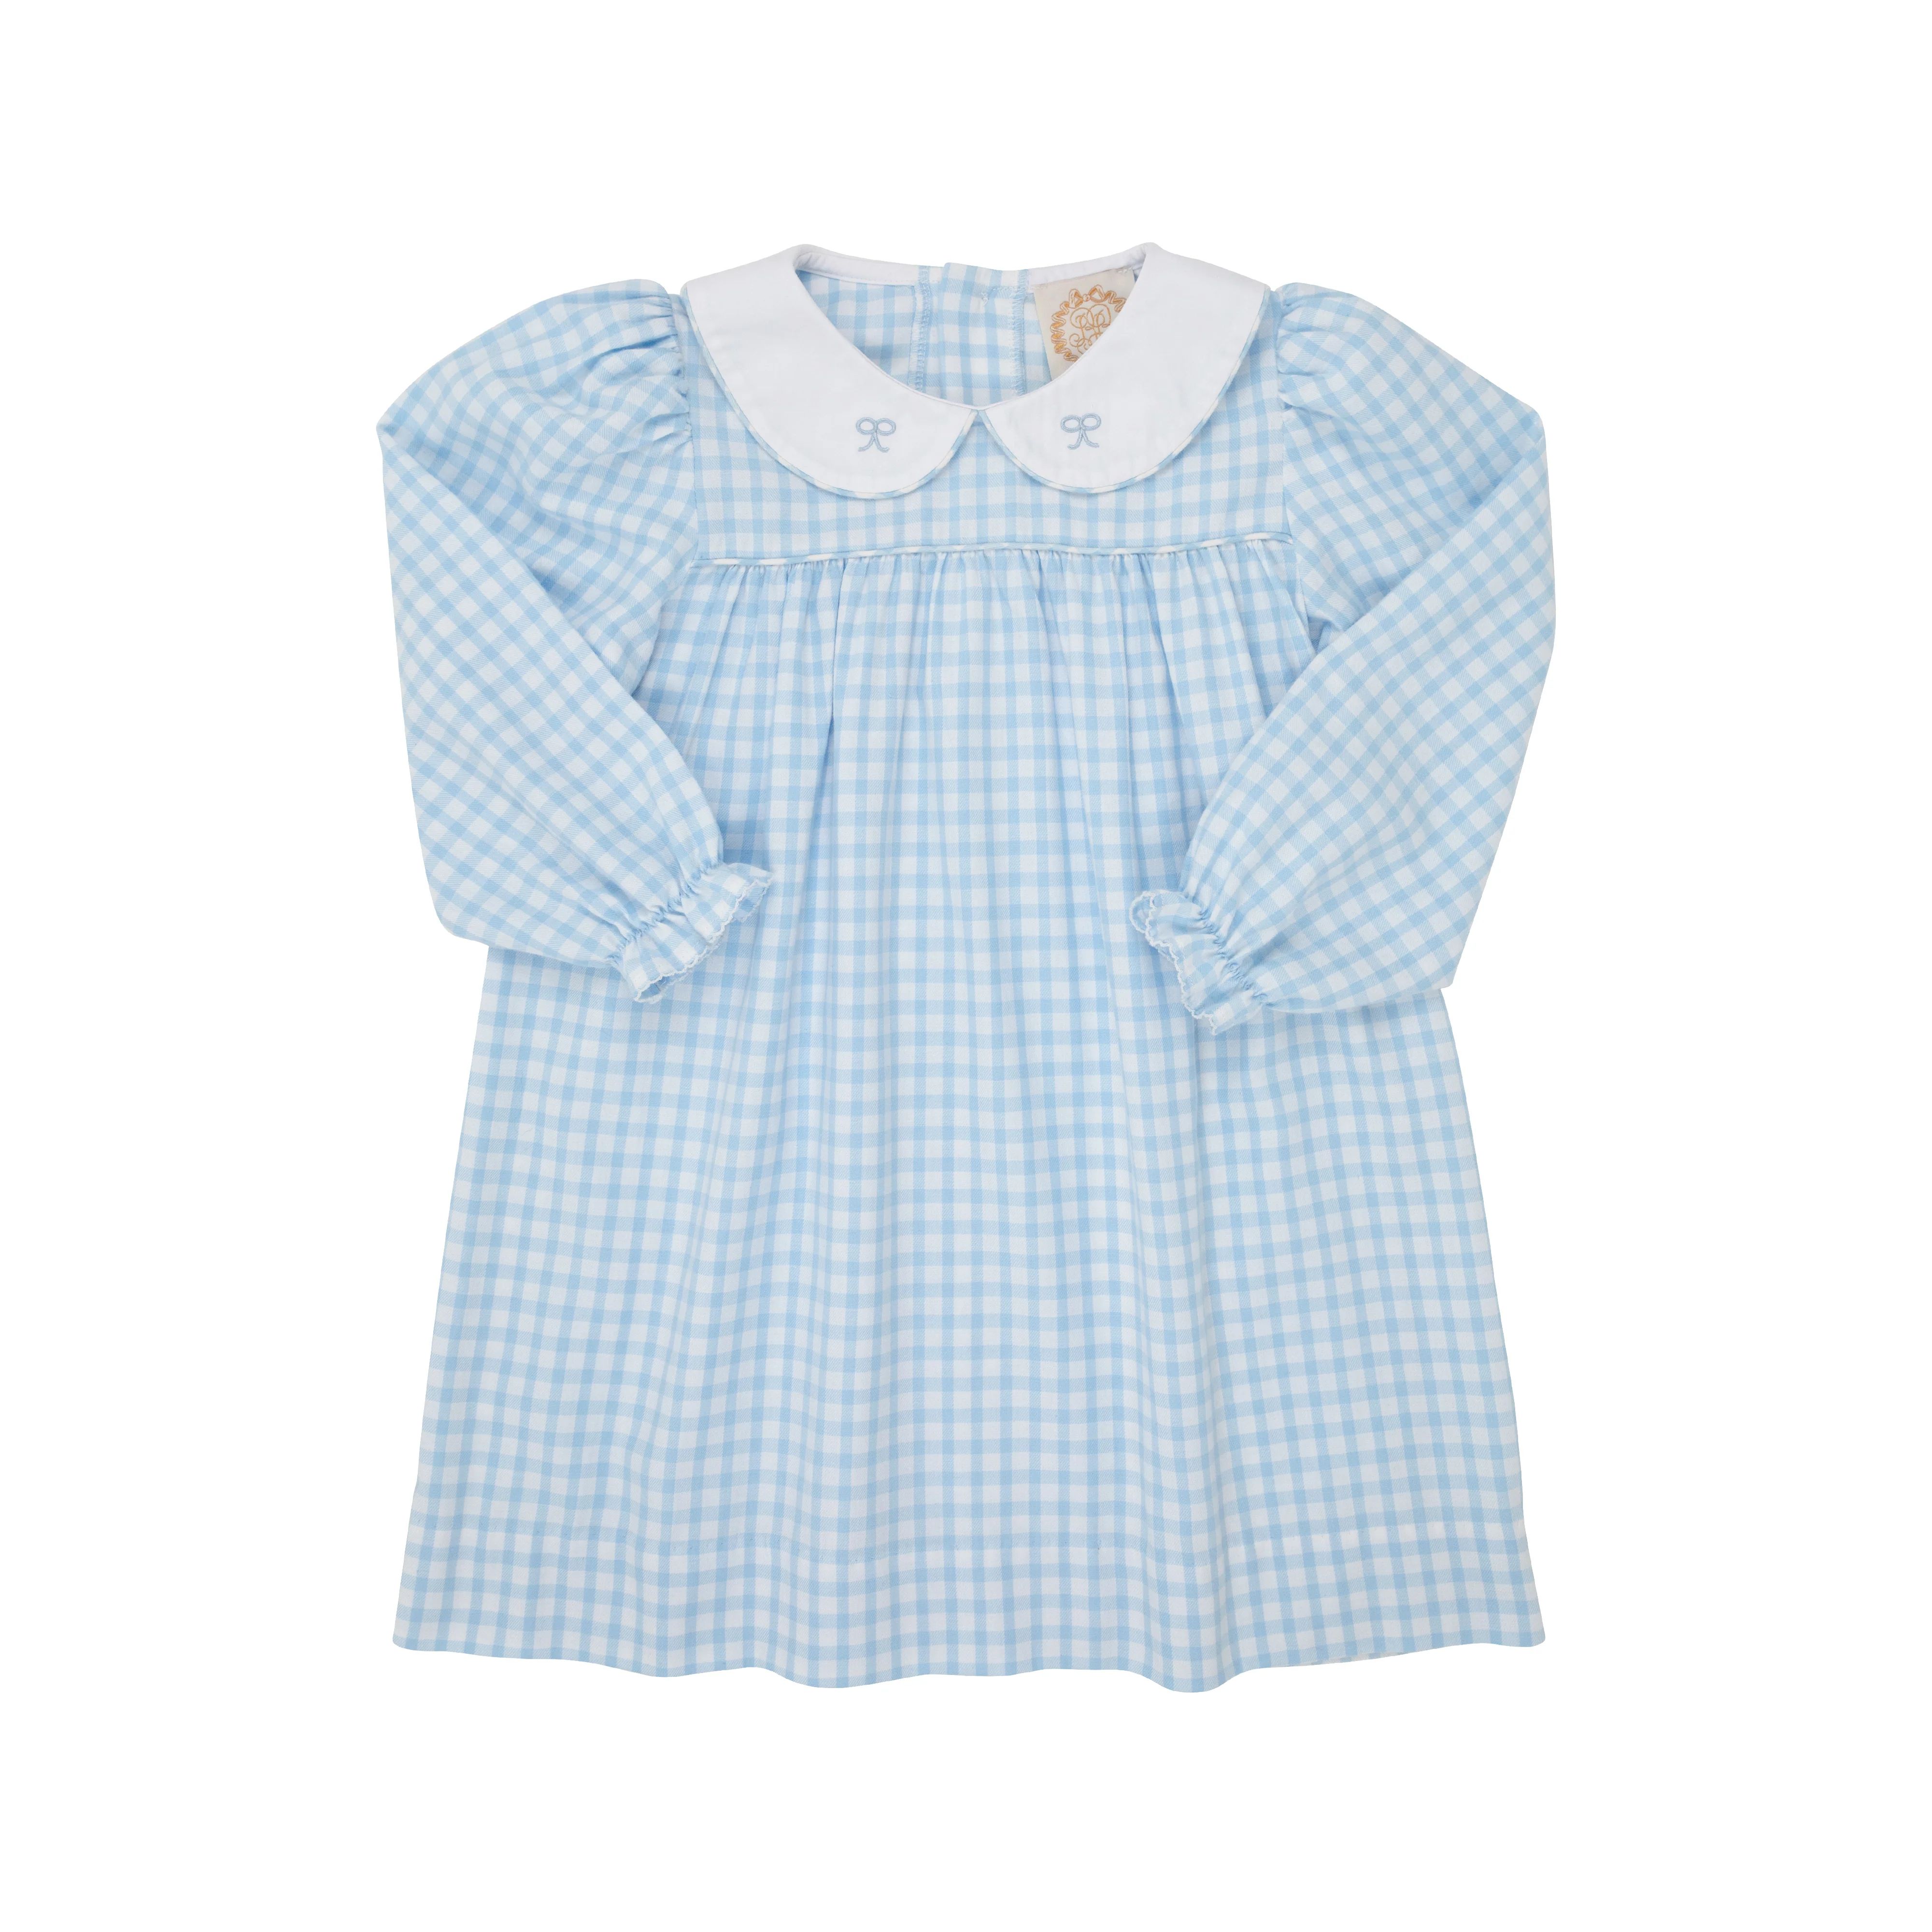 Long Sleeve Maerin Fitz Frock - Blue Chastain Check with Worth Avenue White & Bows Embroidery | The Beaufort Bonnet Company